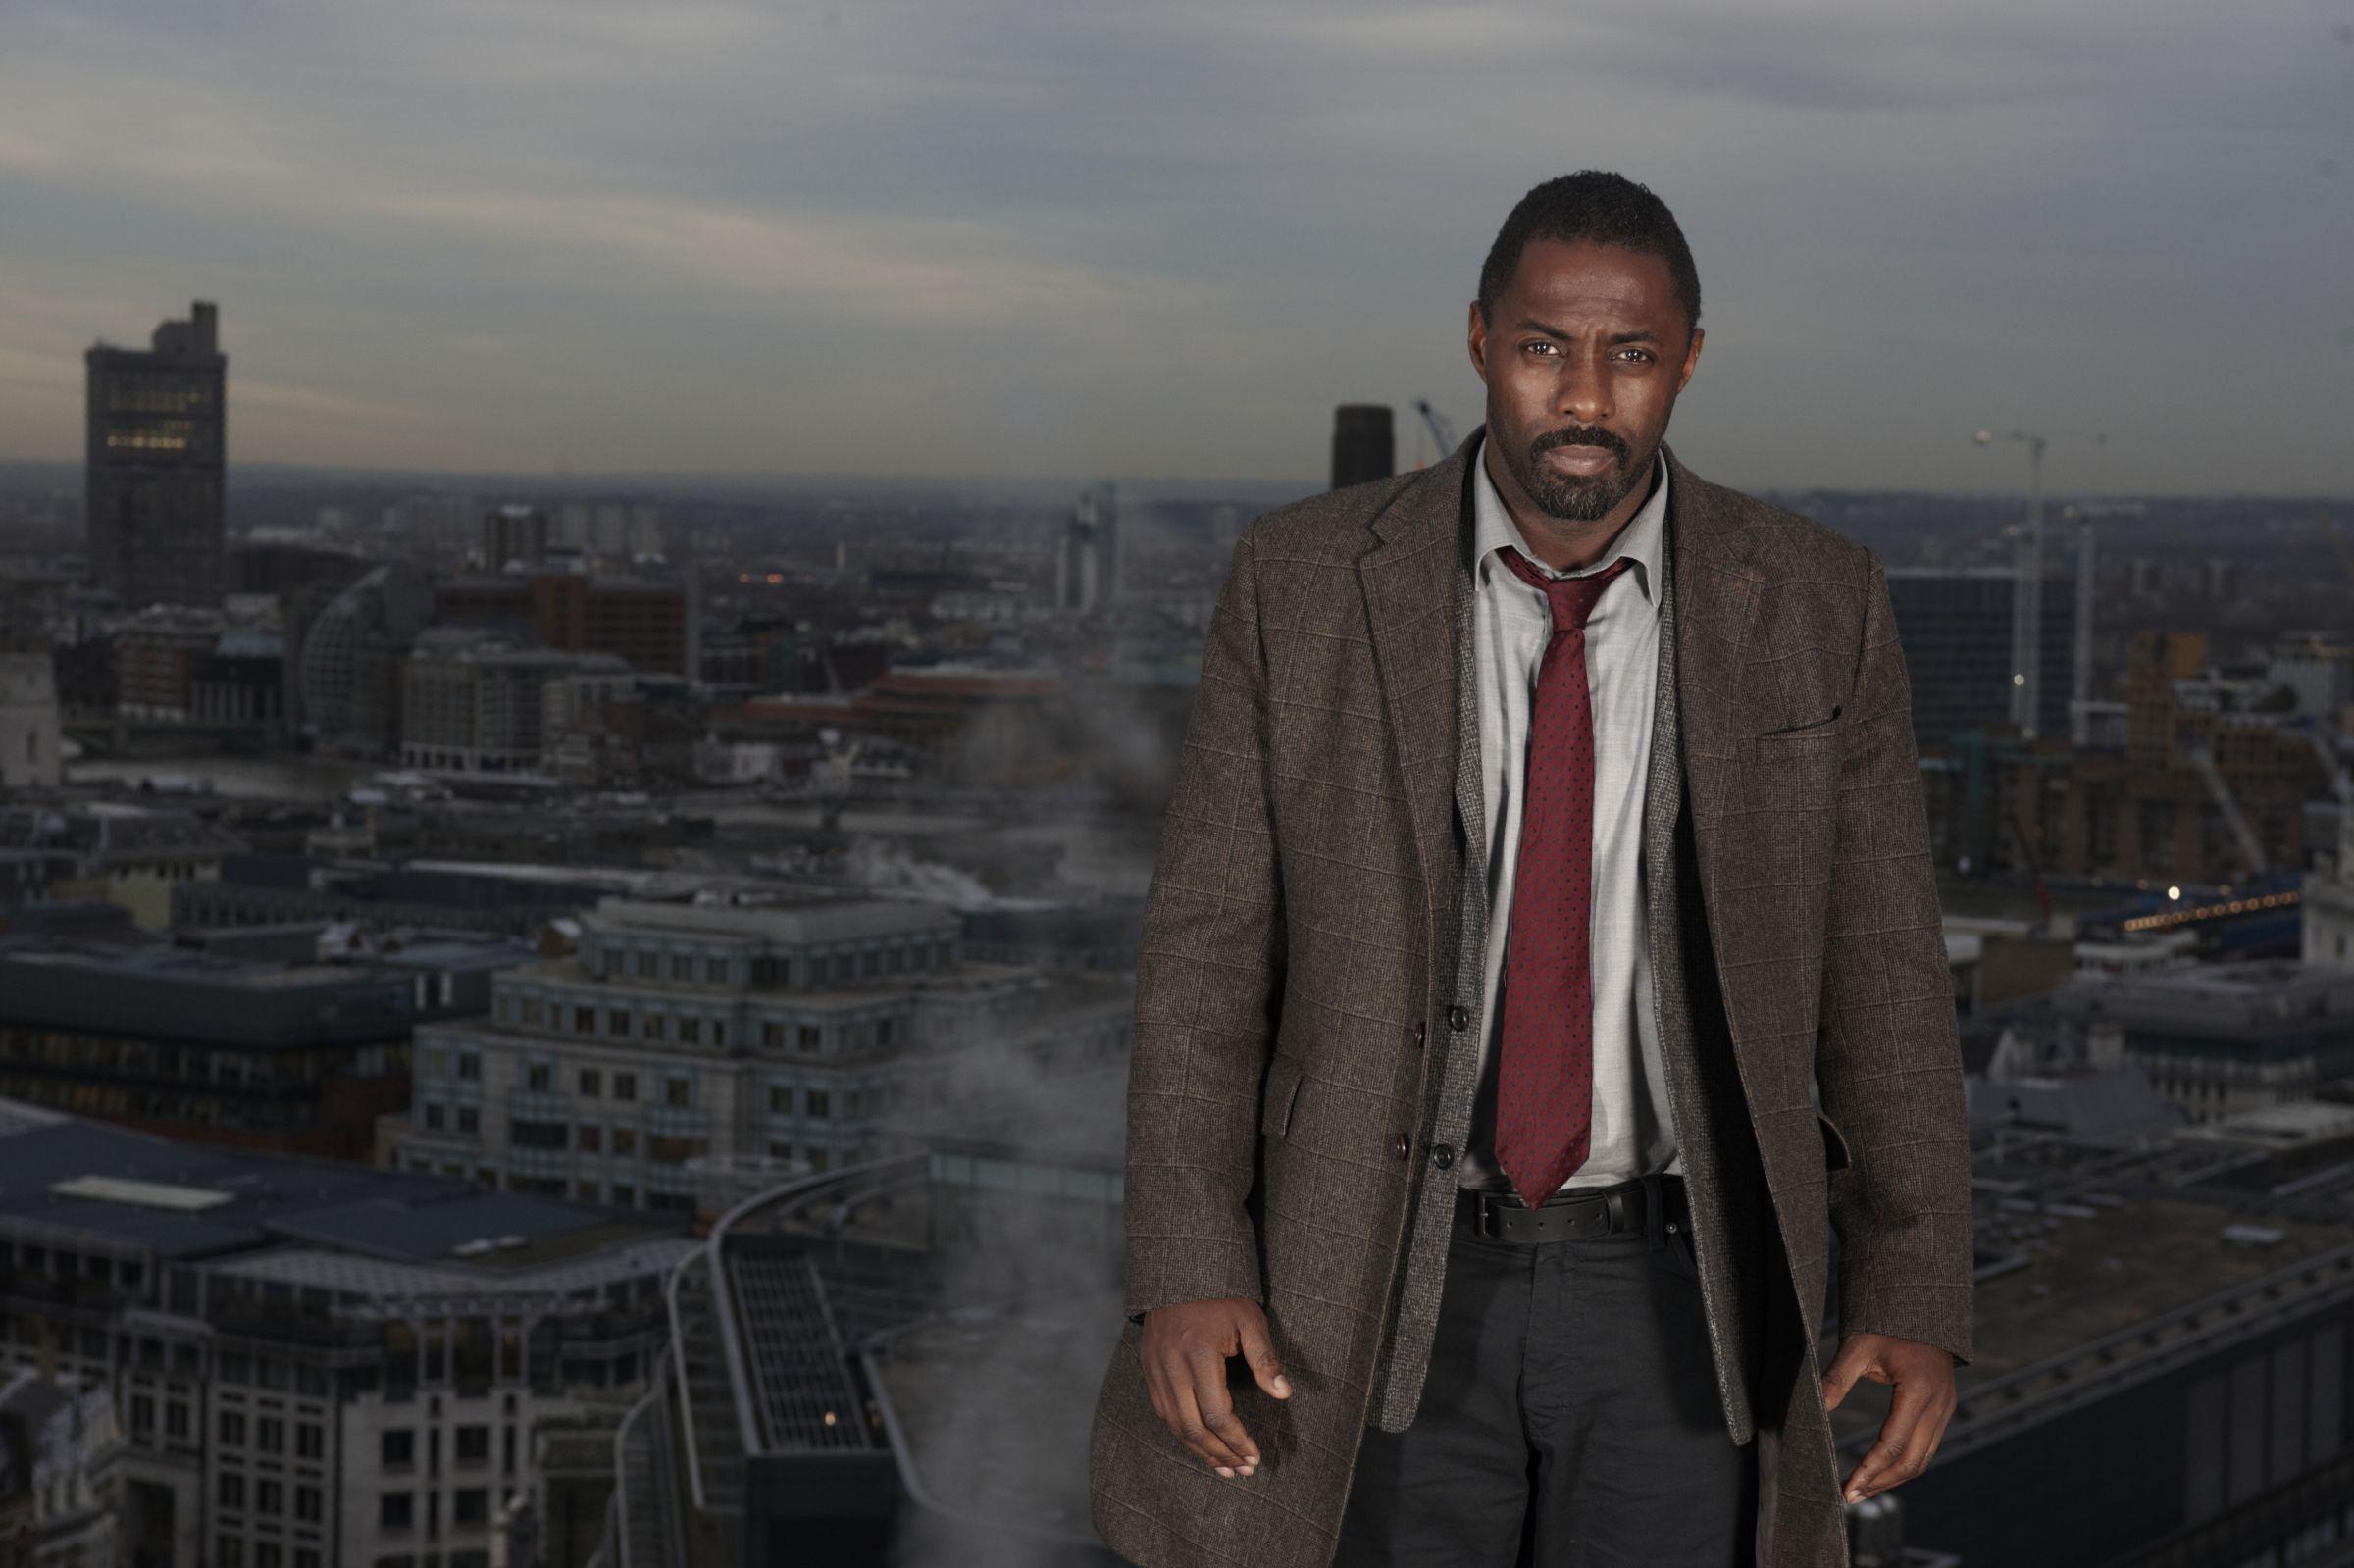 Idris for Everything: Idris Elba as The DoctorIdris for everything